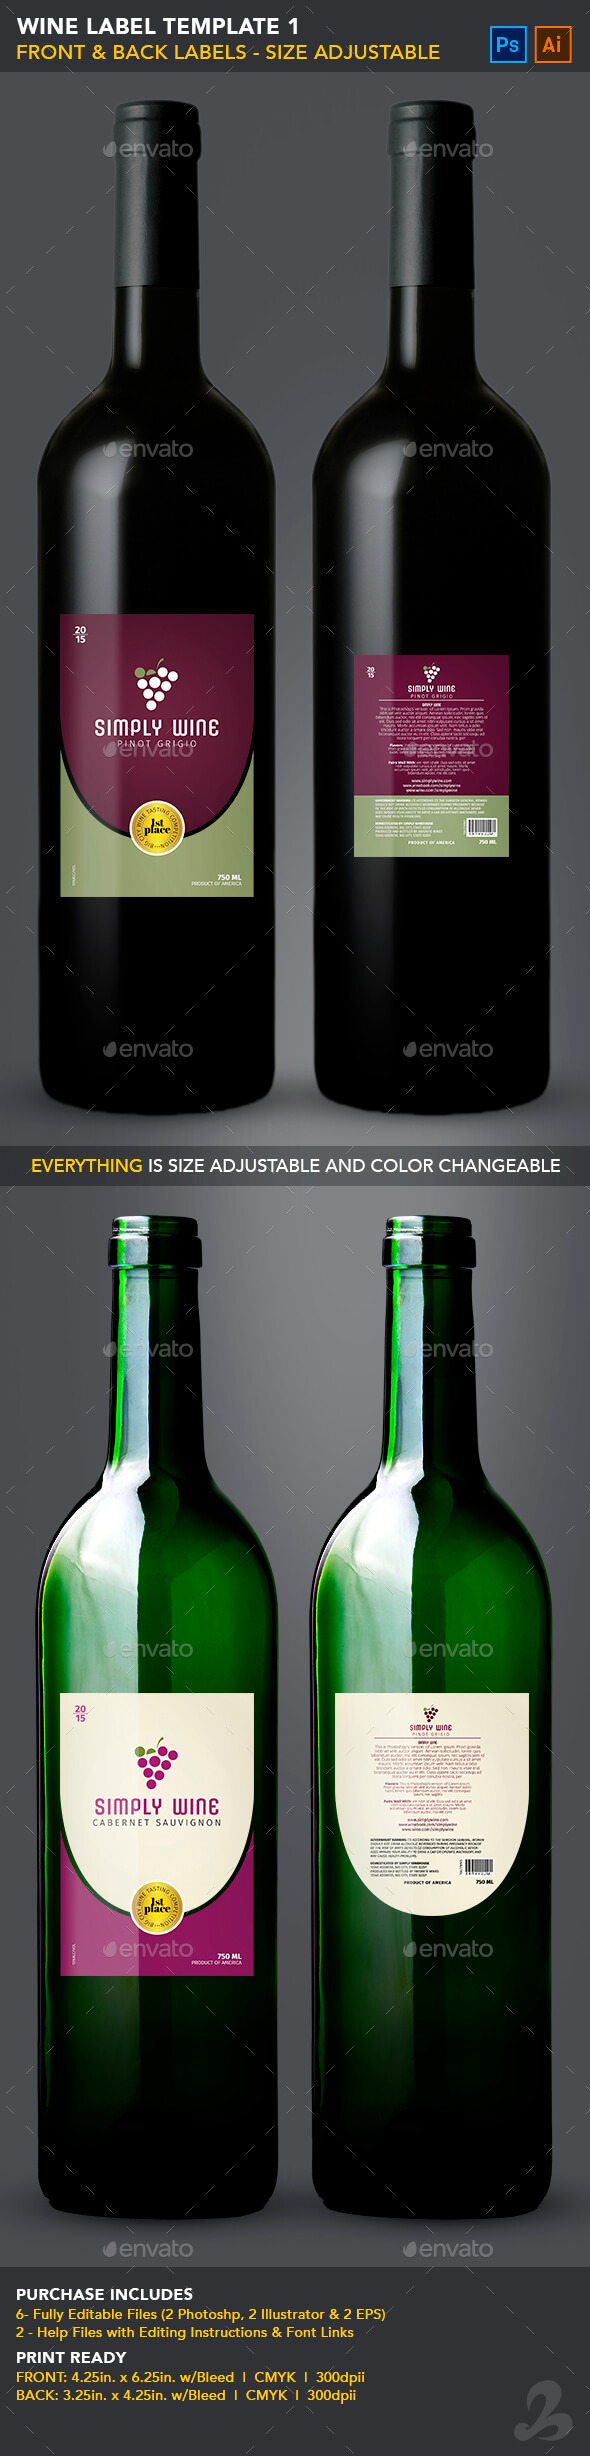 Bottle Label Graphics, Designs & Templates From Graphicriver Pertaining To 3X8 Label Template